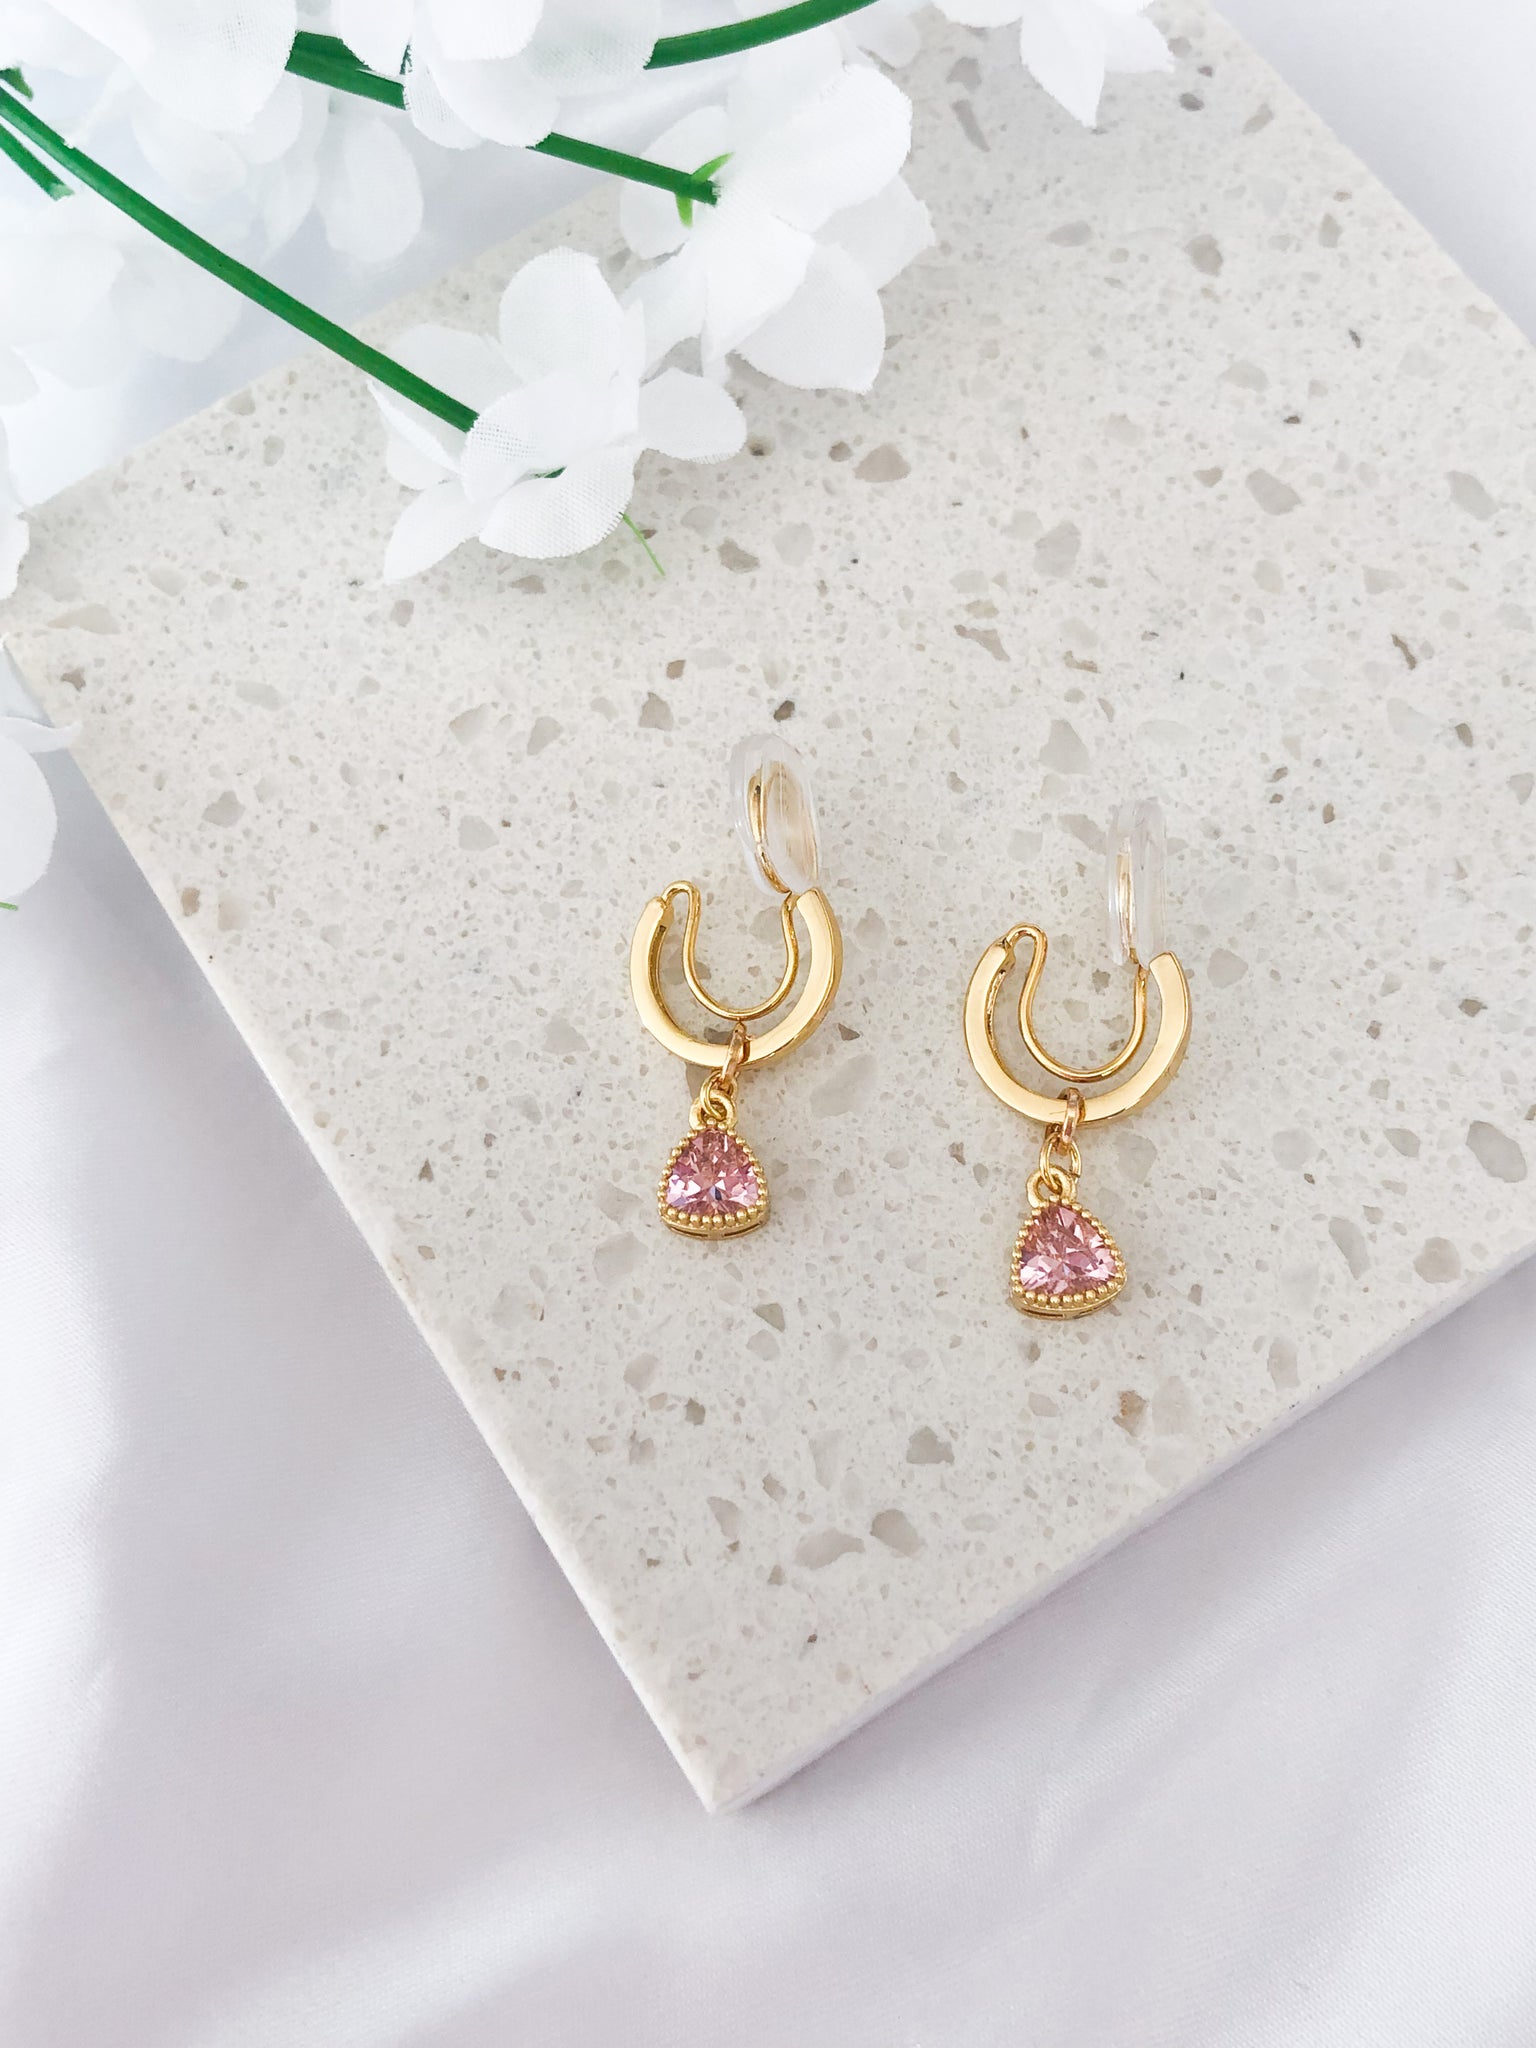 small gold clip-on hoop earrings with pink triangle charm